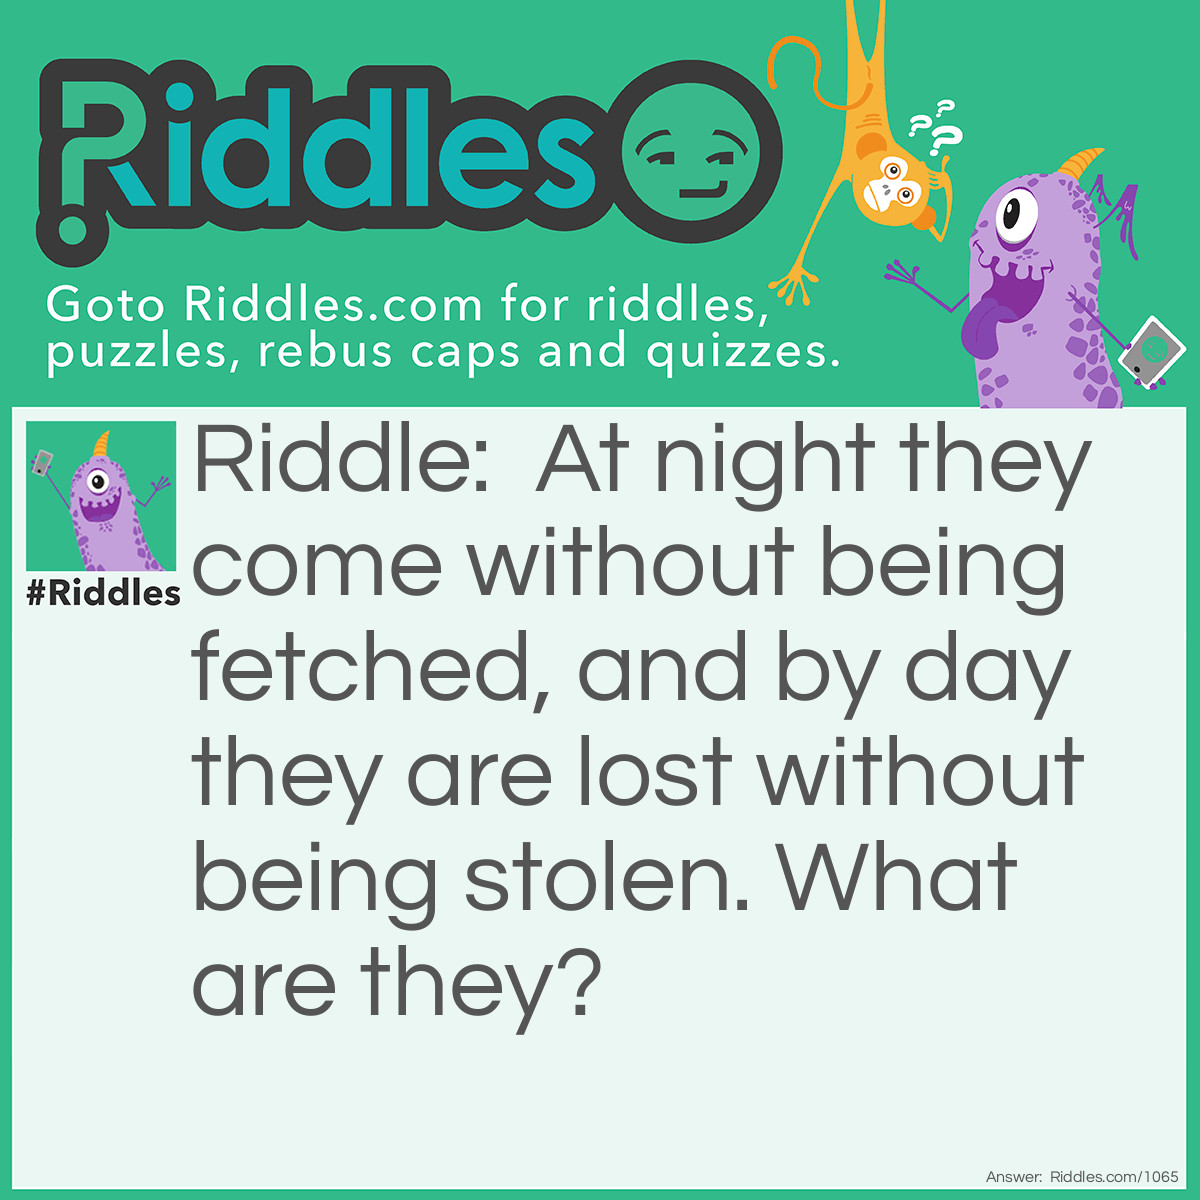 Riddle: At night they come without being fetched, and by day they are lost without being stolen. What are they? Answer: Stars.